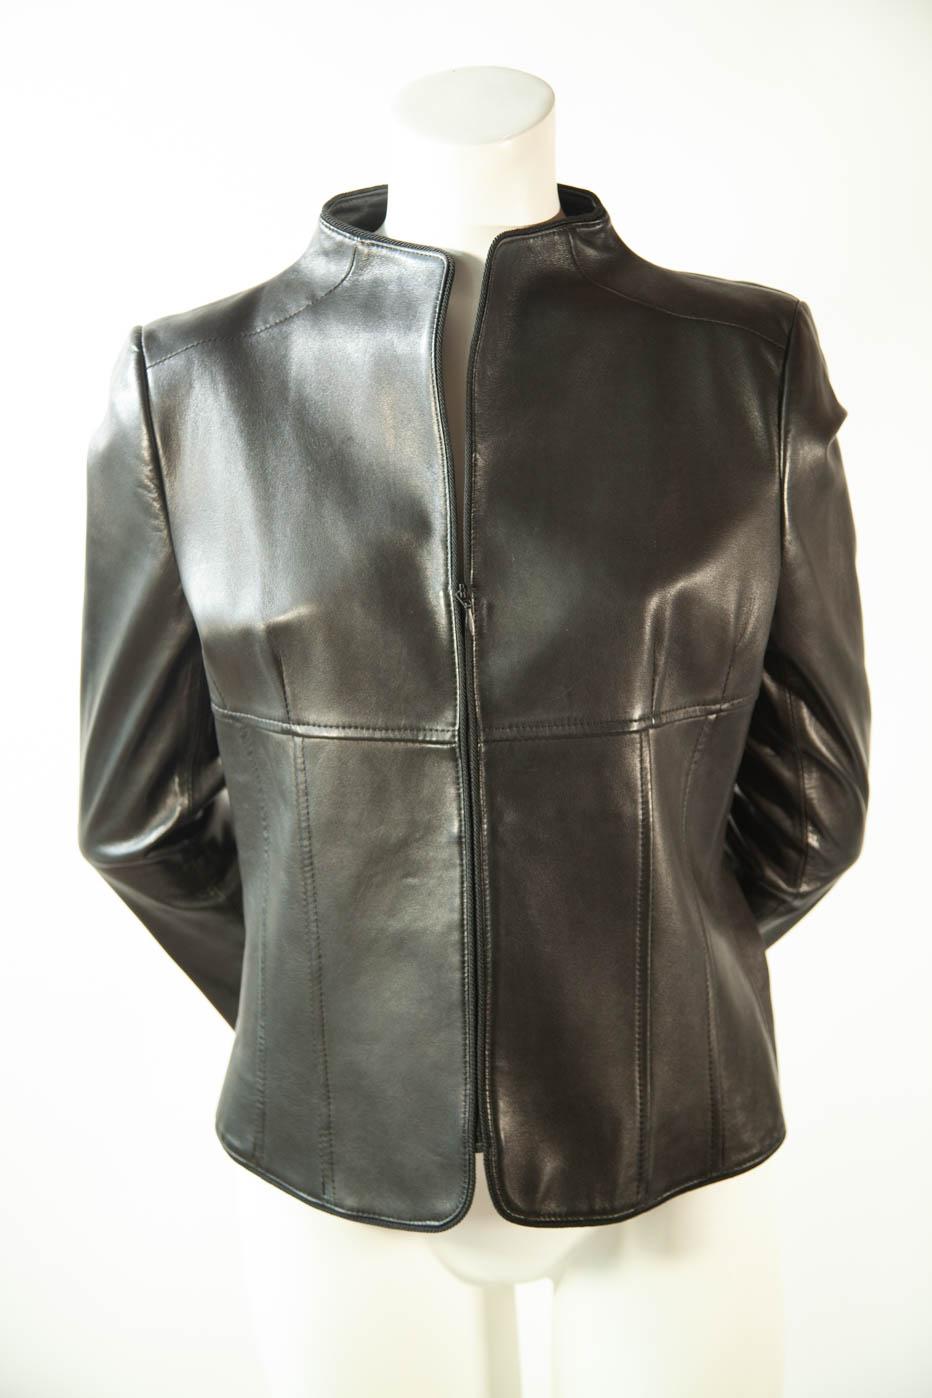 Valentino (Roma), Lambskin, Minimalist, Jacket with Red Lining and Repeating Logo, 2000s

Sz 46 (US 6)

Excellent, mint condition. 